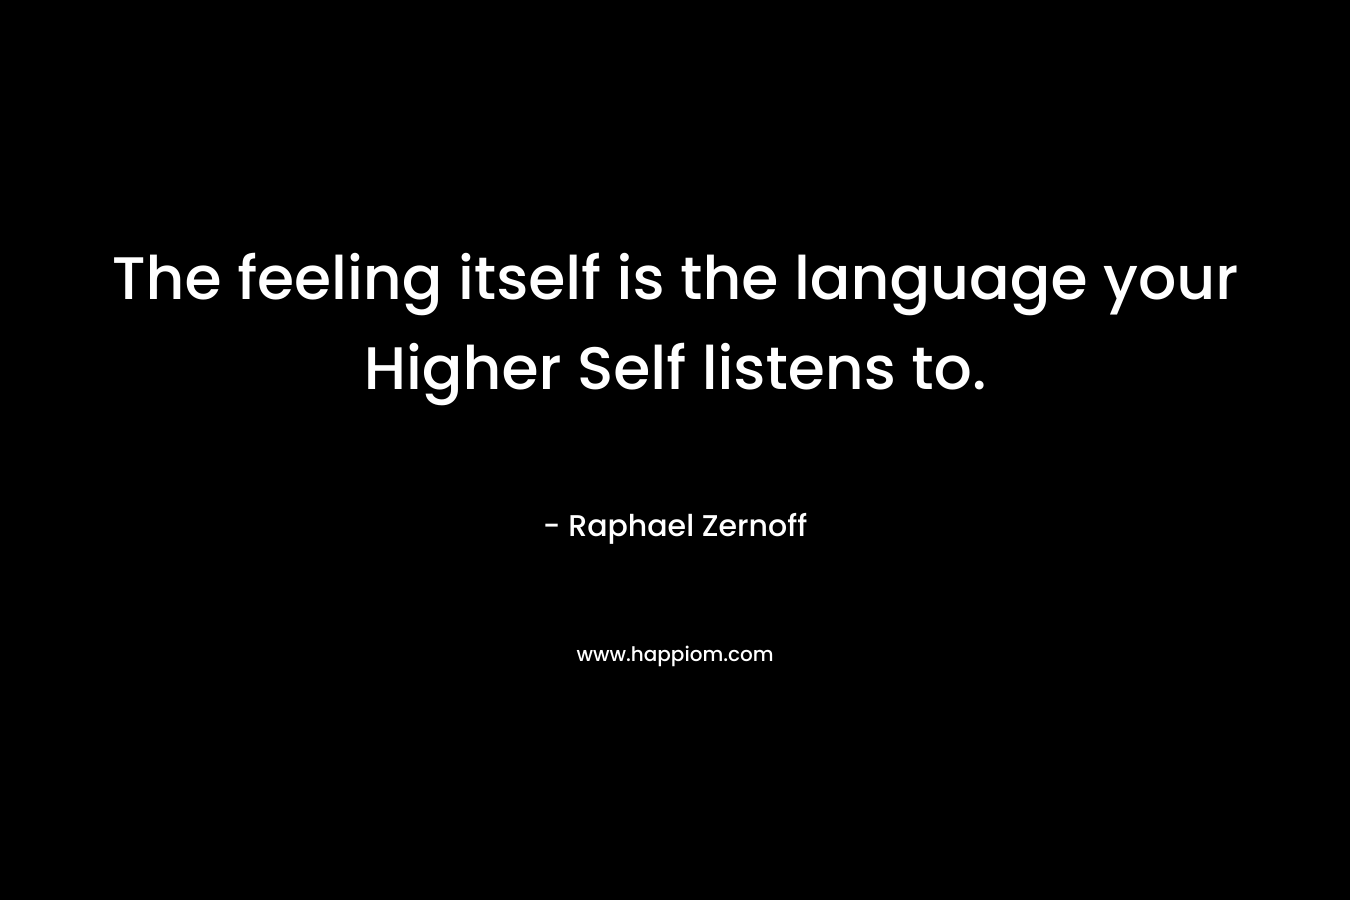 The feeling itself is the language your Higher Self listens to.